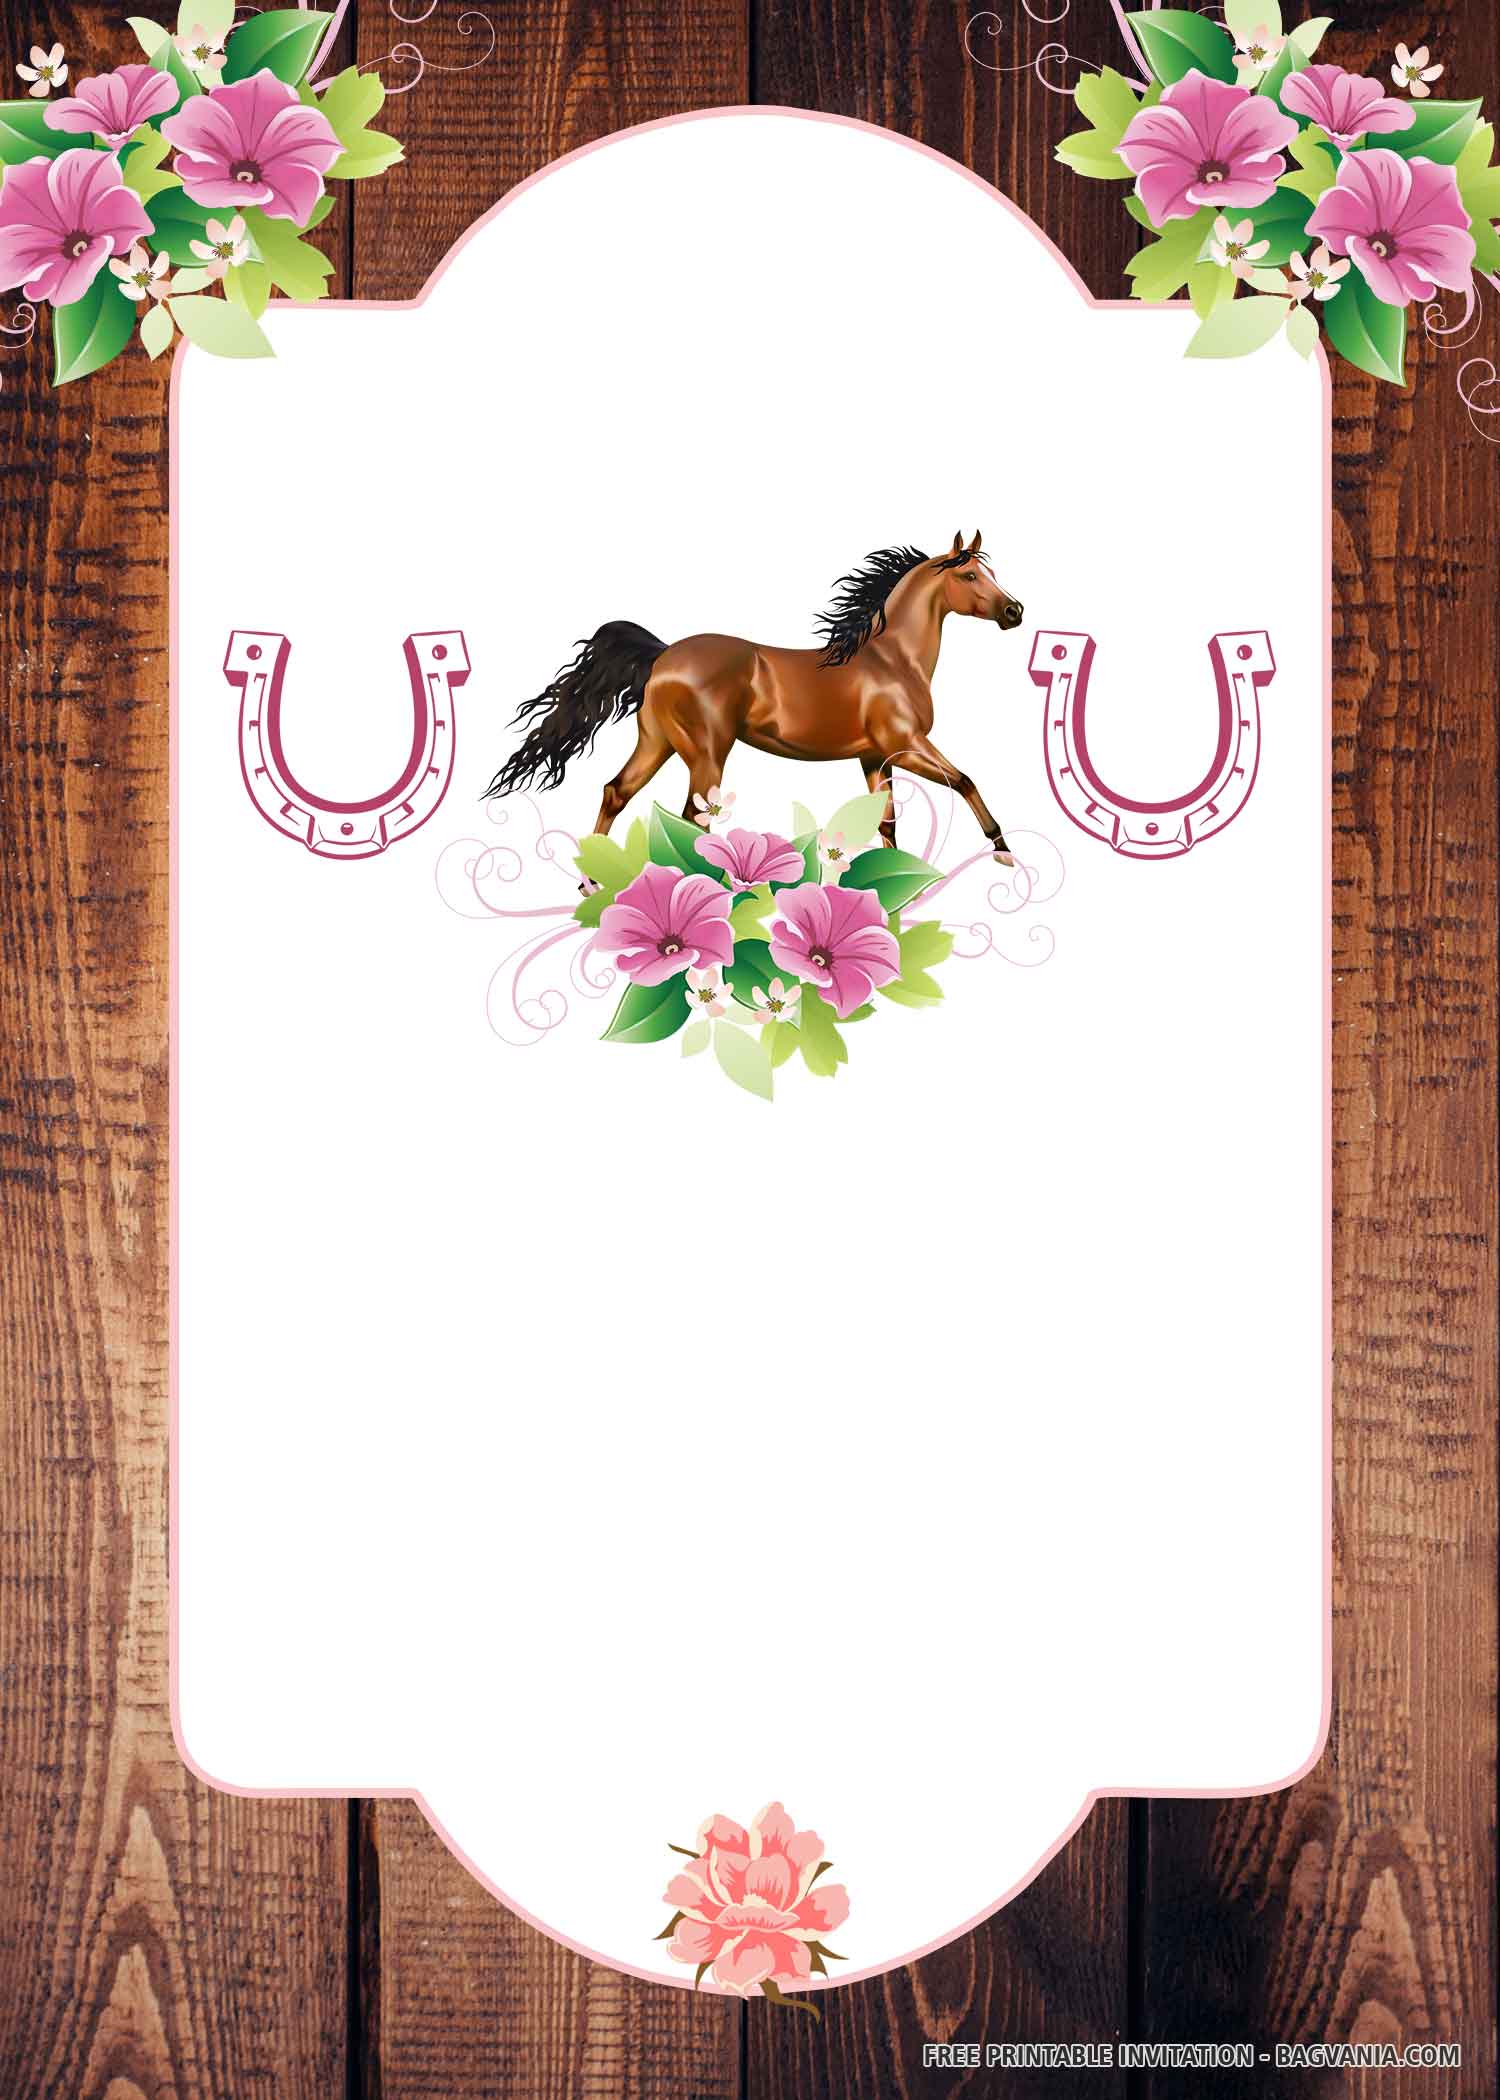 FREE Pink Horse with Horseshoes, Four Flowers, Wood Background